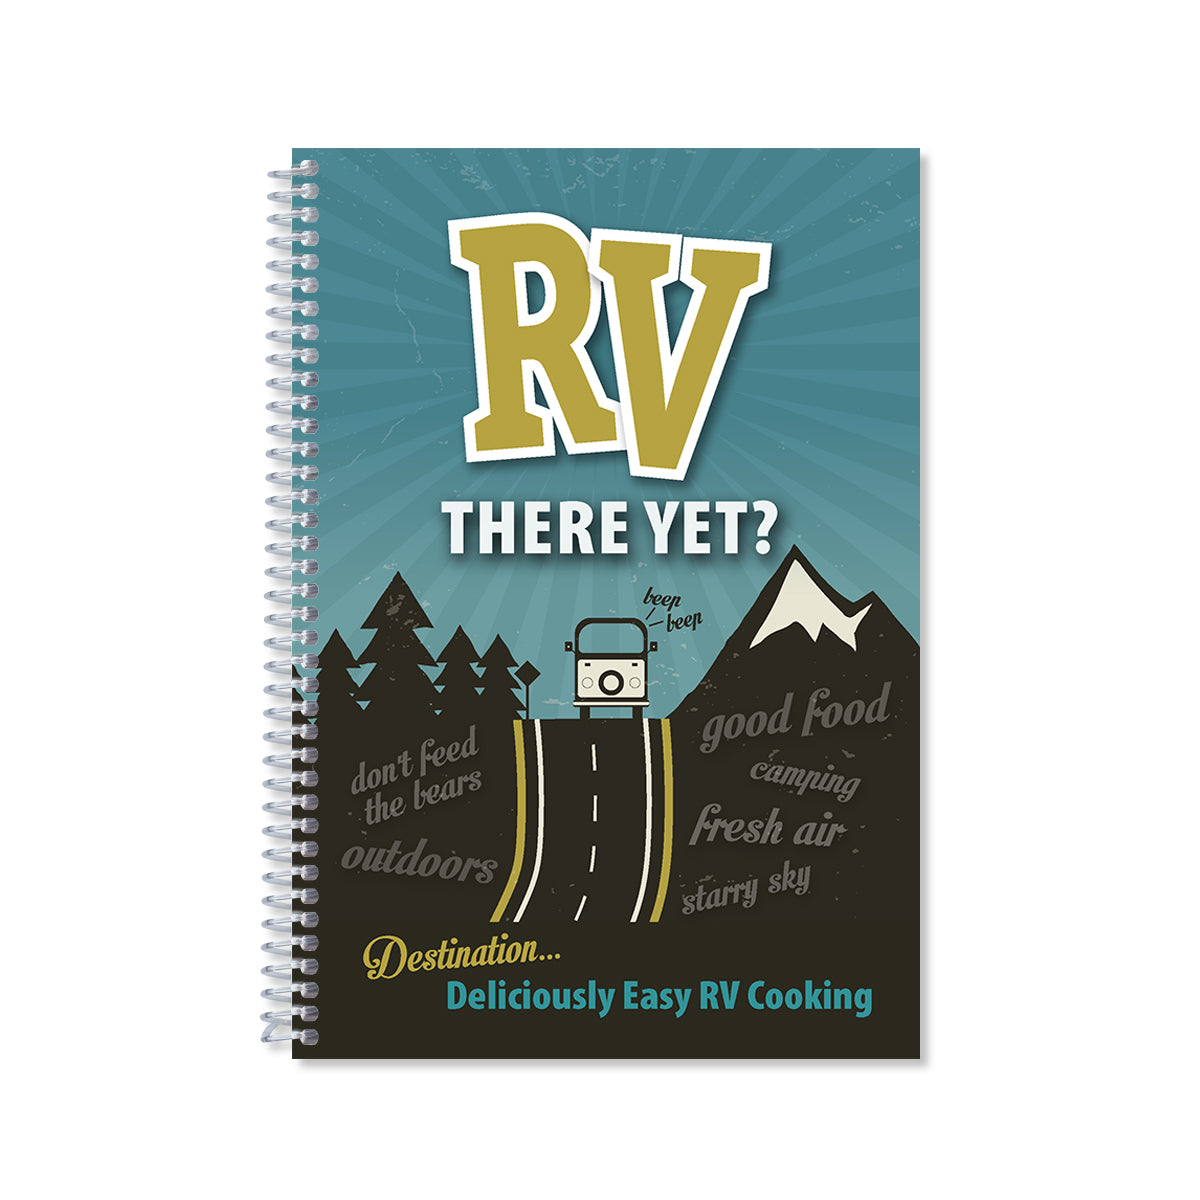 RV There Yet Cookbook. Deliciously Easy RV Cooking.